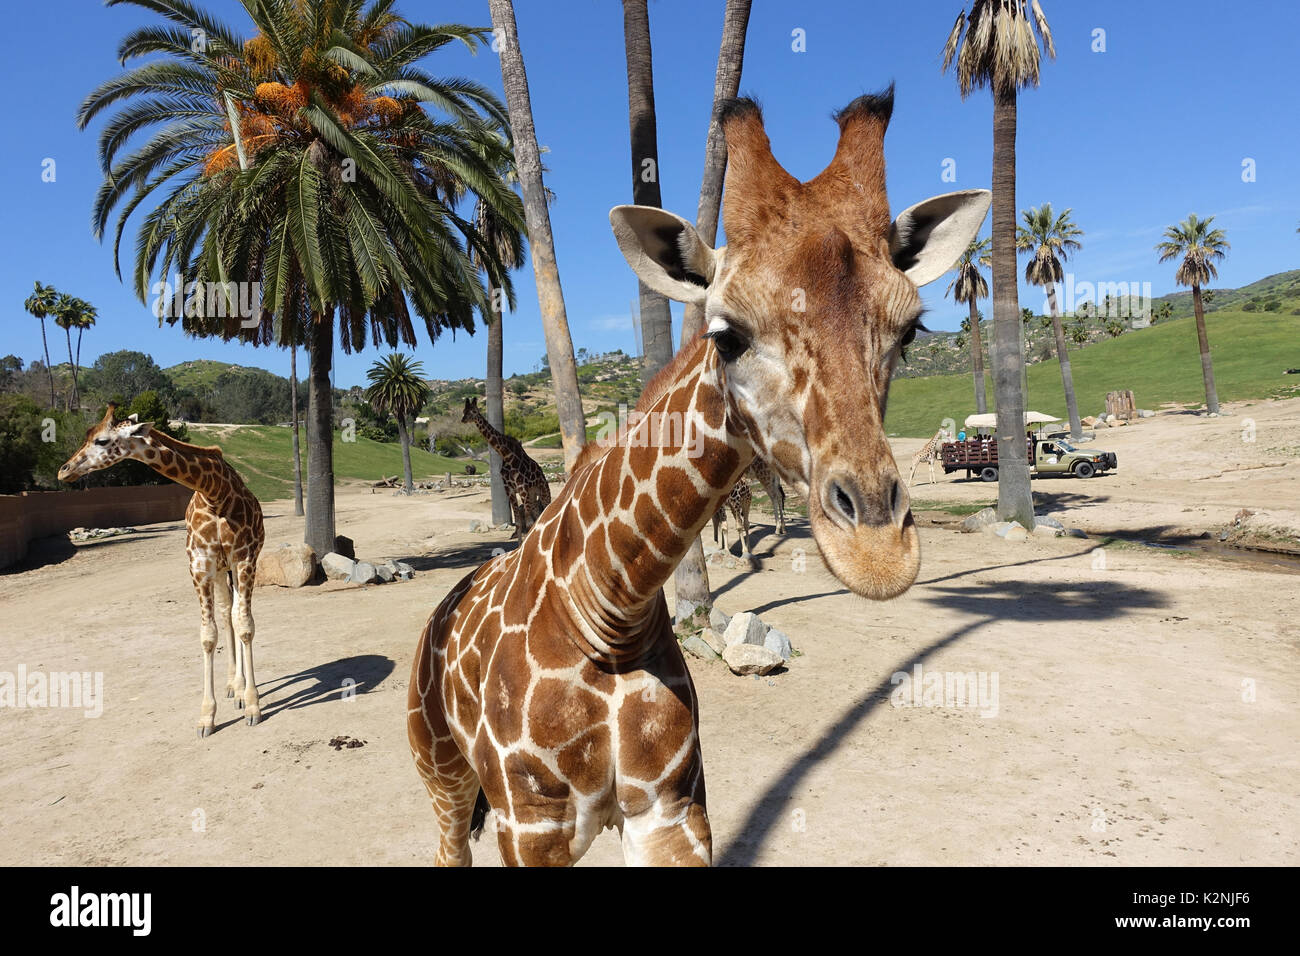 San Diego Zoo Safari Park - There are over 2,000 animals just hanging out here in big open spaces. Stock Photo